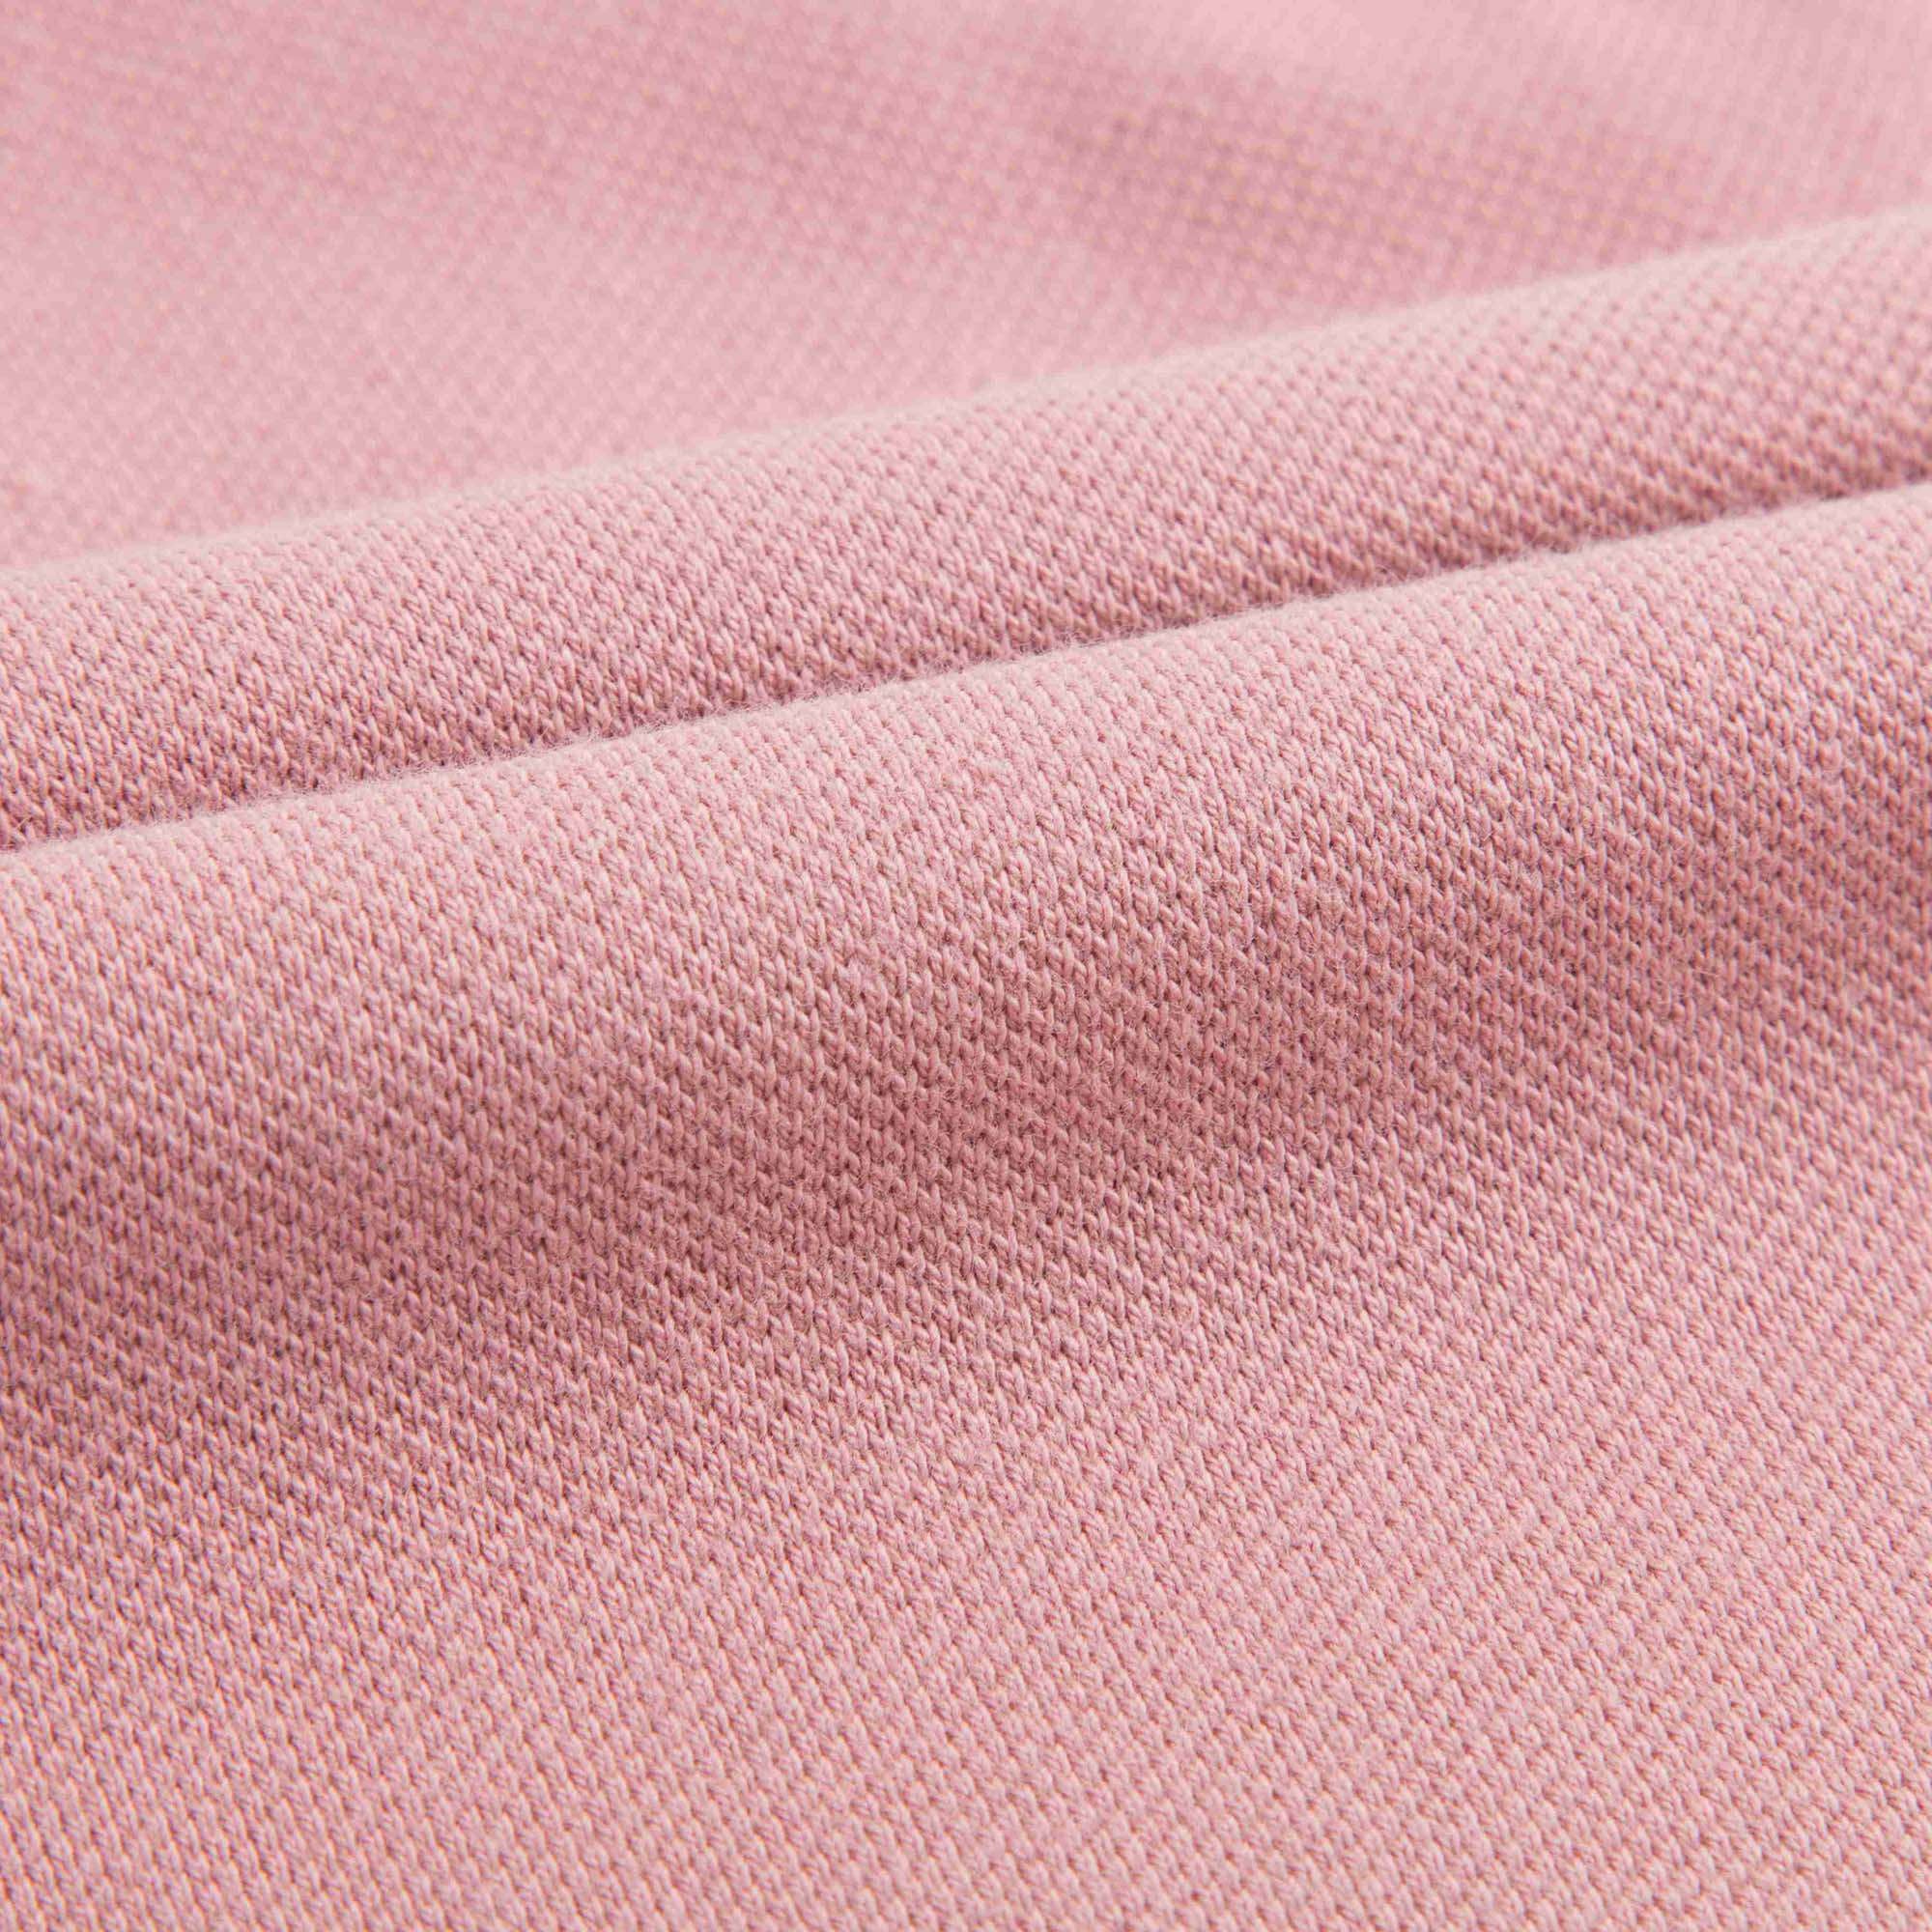 Baby Girls Pink Polo Shirt With Check Ruffles